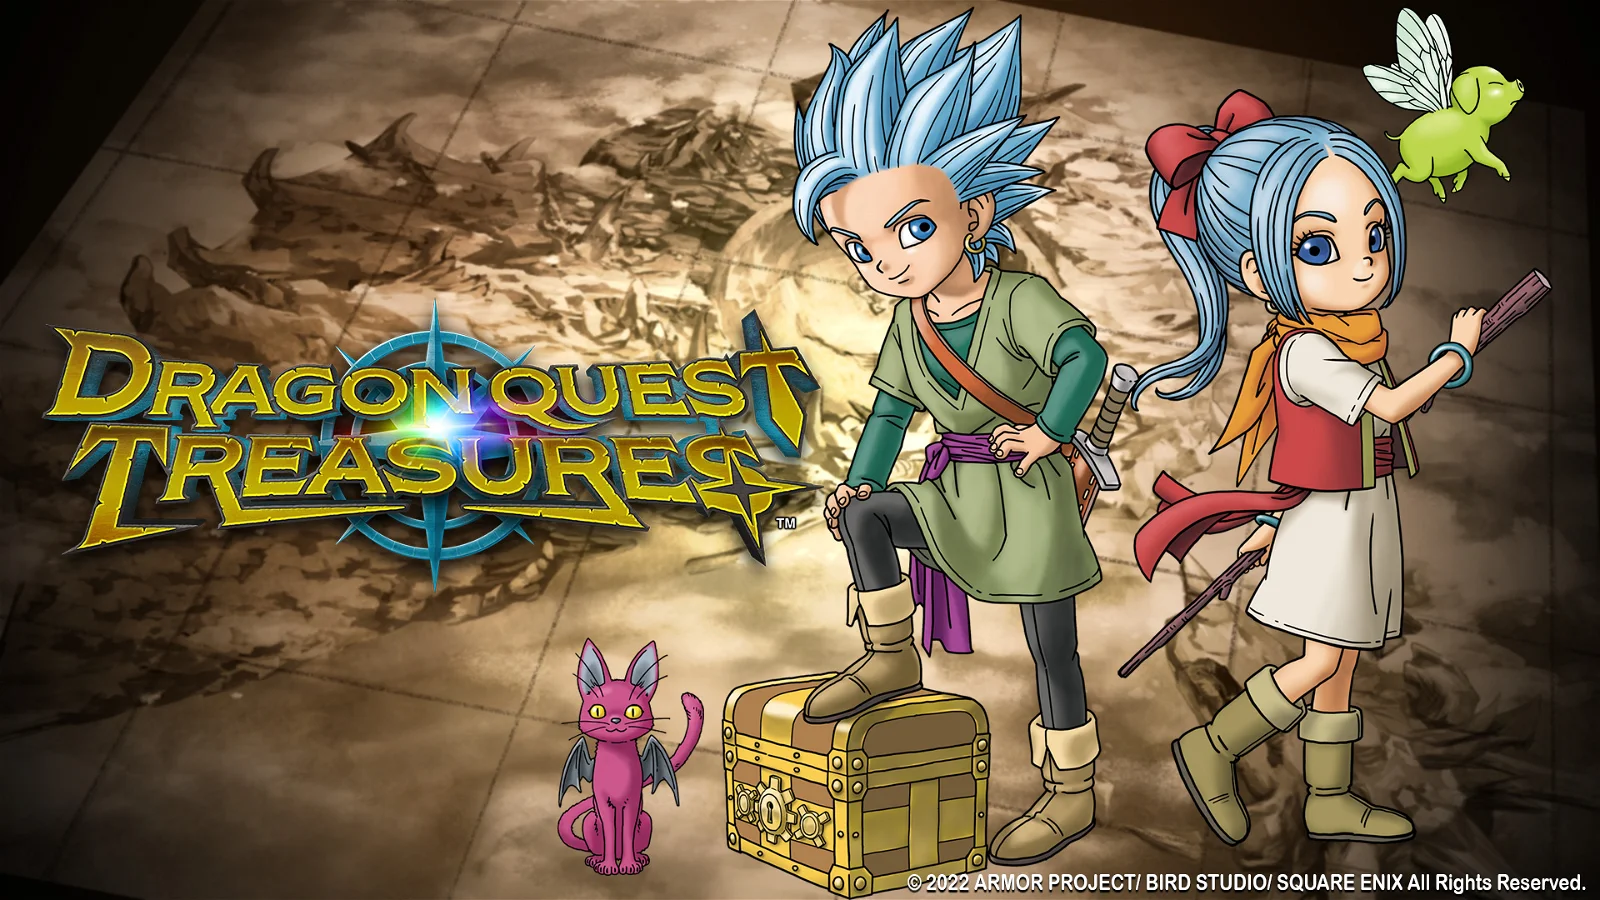 Dragon Quest Treasures Release Date and Details